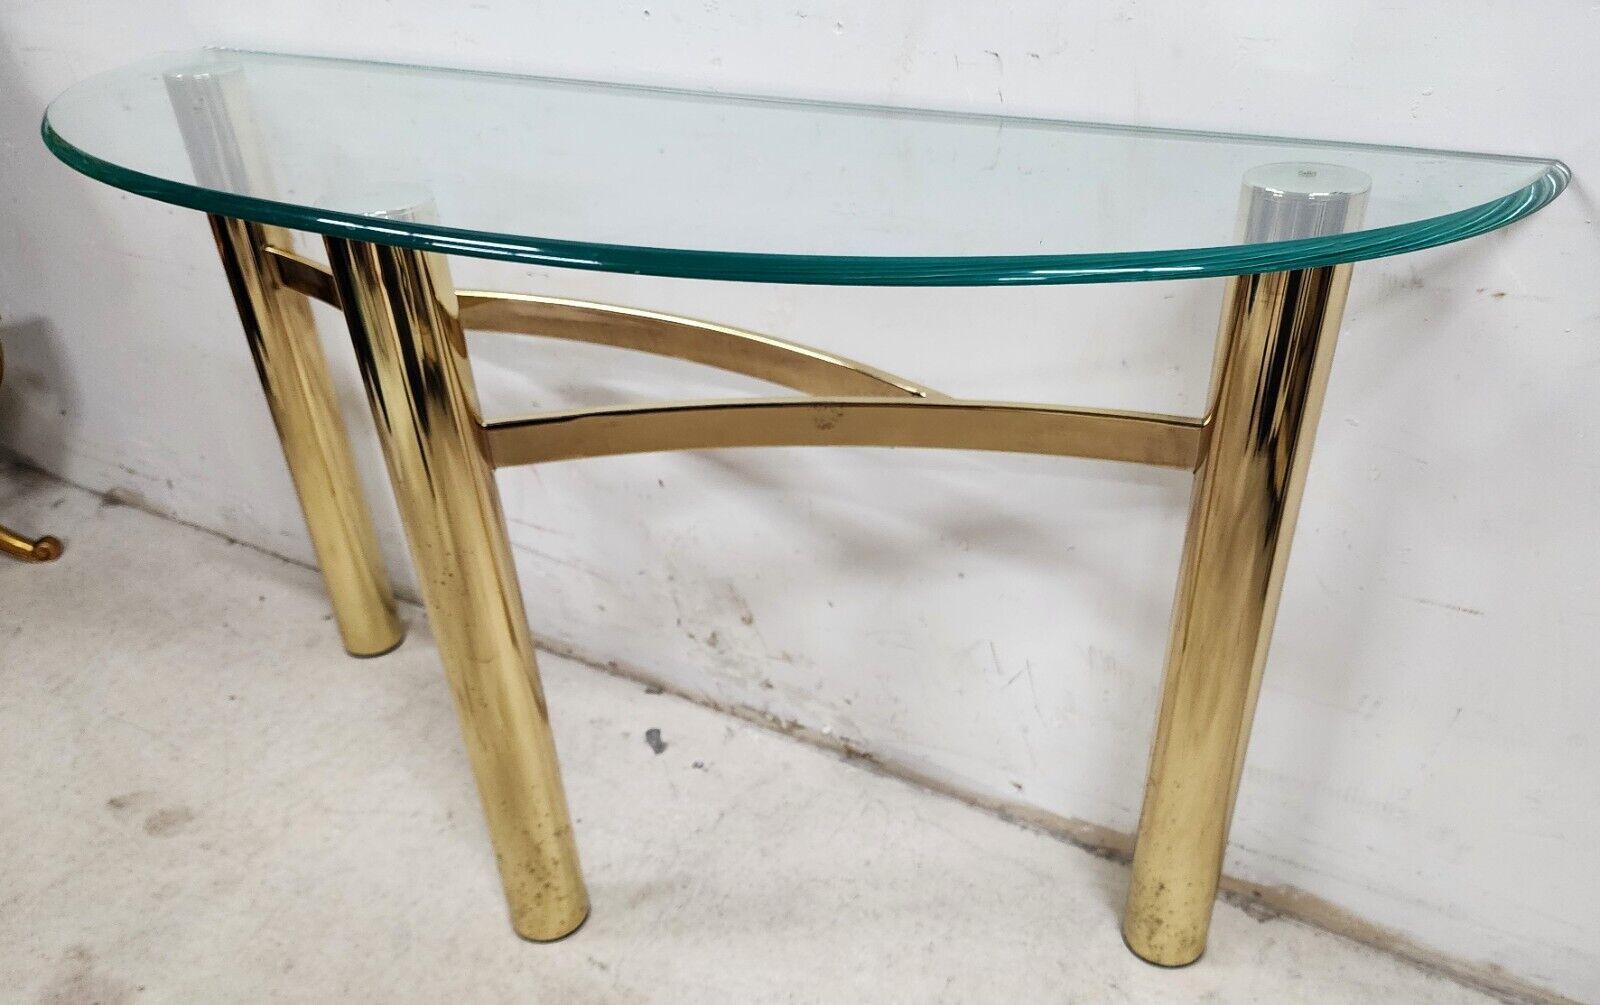 For FULL item description click on CONTINUE READING at the bottom of this page.

Offering One Of Our Recent Palm Beach Estate Fine Furniture Acquisitions Of A
MCM Tubular Brass Demilune Console Table Vintage

We also have 3 other matching side